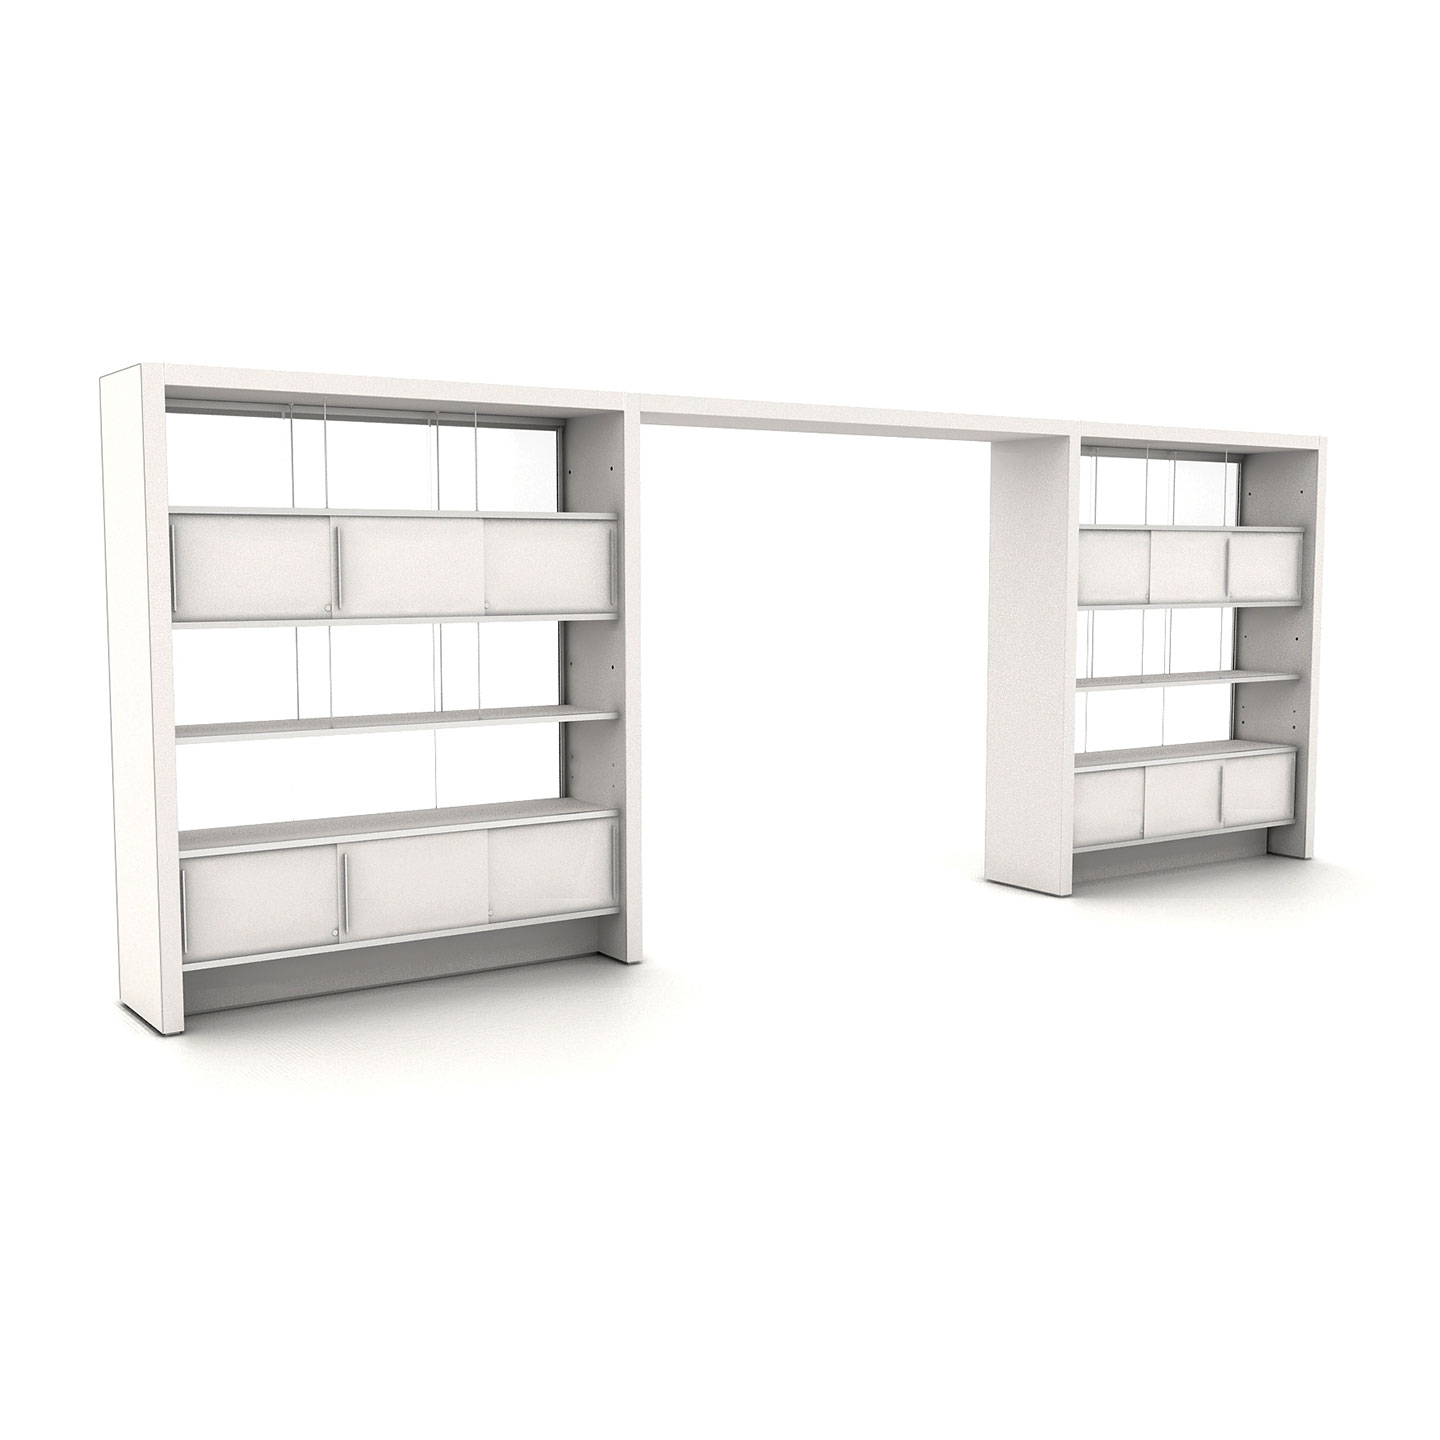 Haworth Patterns Architectural Workspace in mock office setting and shelving unit in a white color